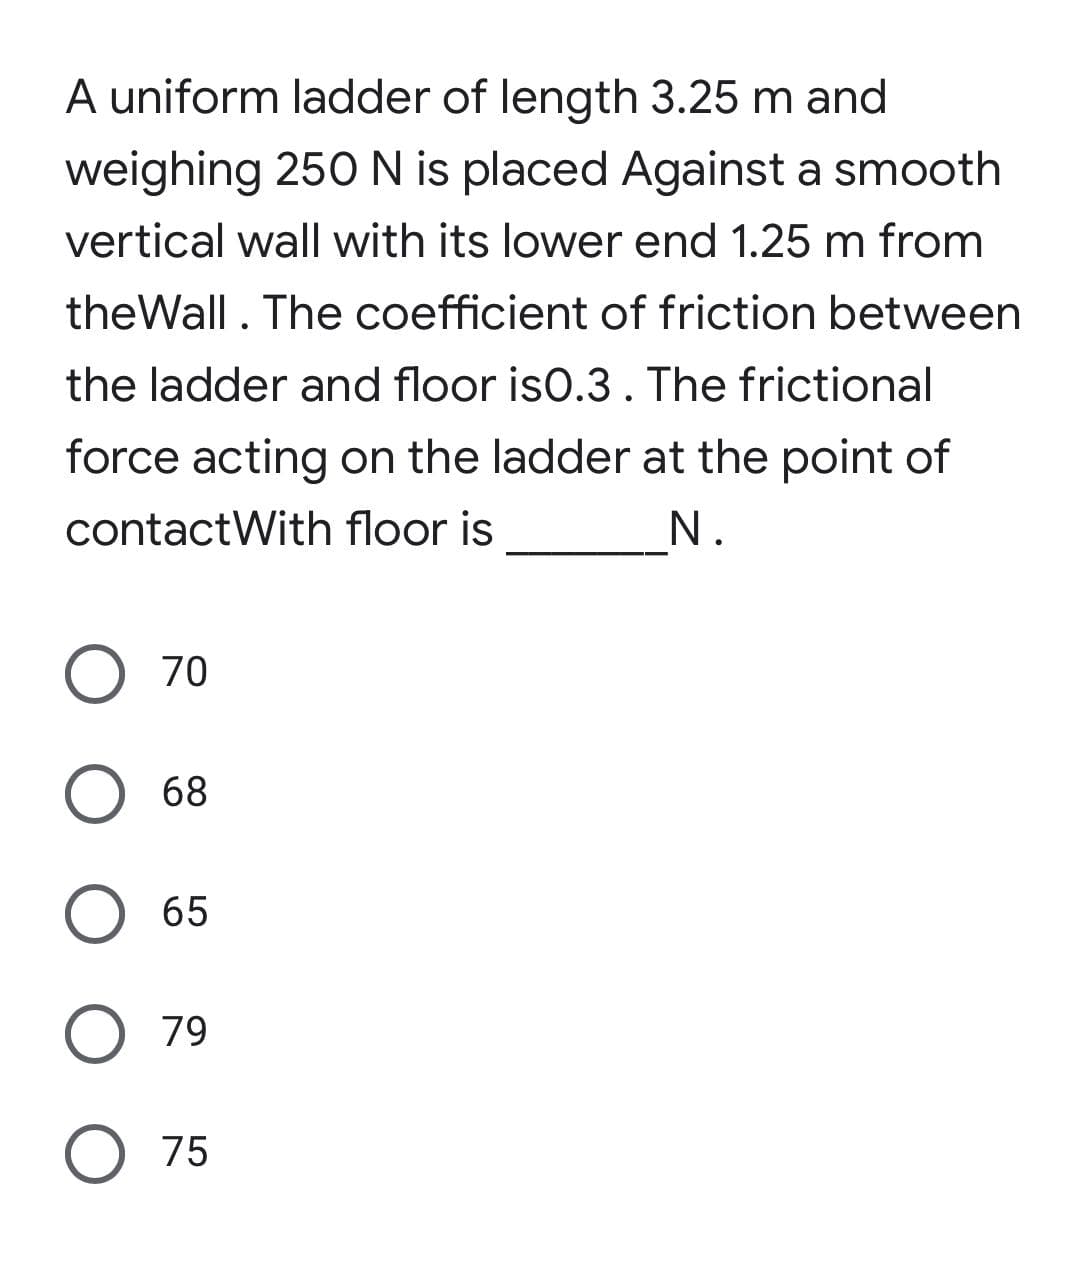 A uniform ladder of length 3.25 m and
weighing 250 N is placed Against a smooth
vertical wall with its lower end 1.25 m from
theWall. The coefficient of friction between
the ladder and floor is0.3. The frictional
force acting on the ladder at the point of
contactWith floor is
O 70
O 68
O 65
O 79
O 75
N.